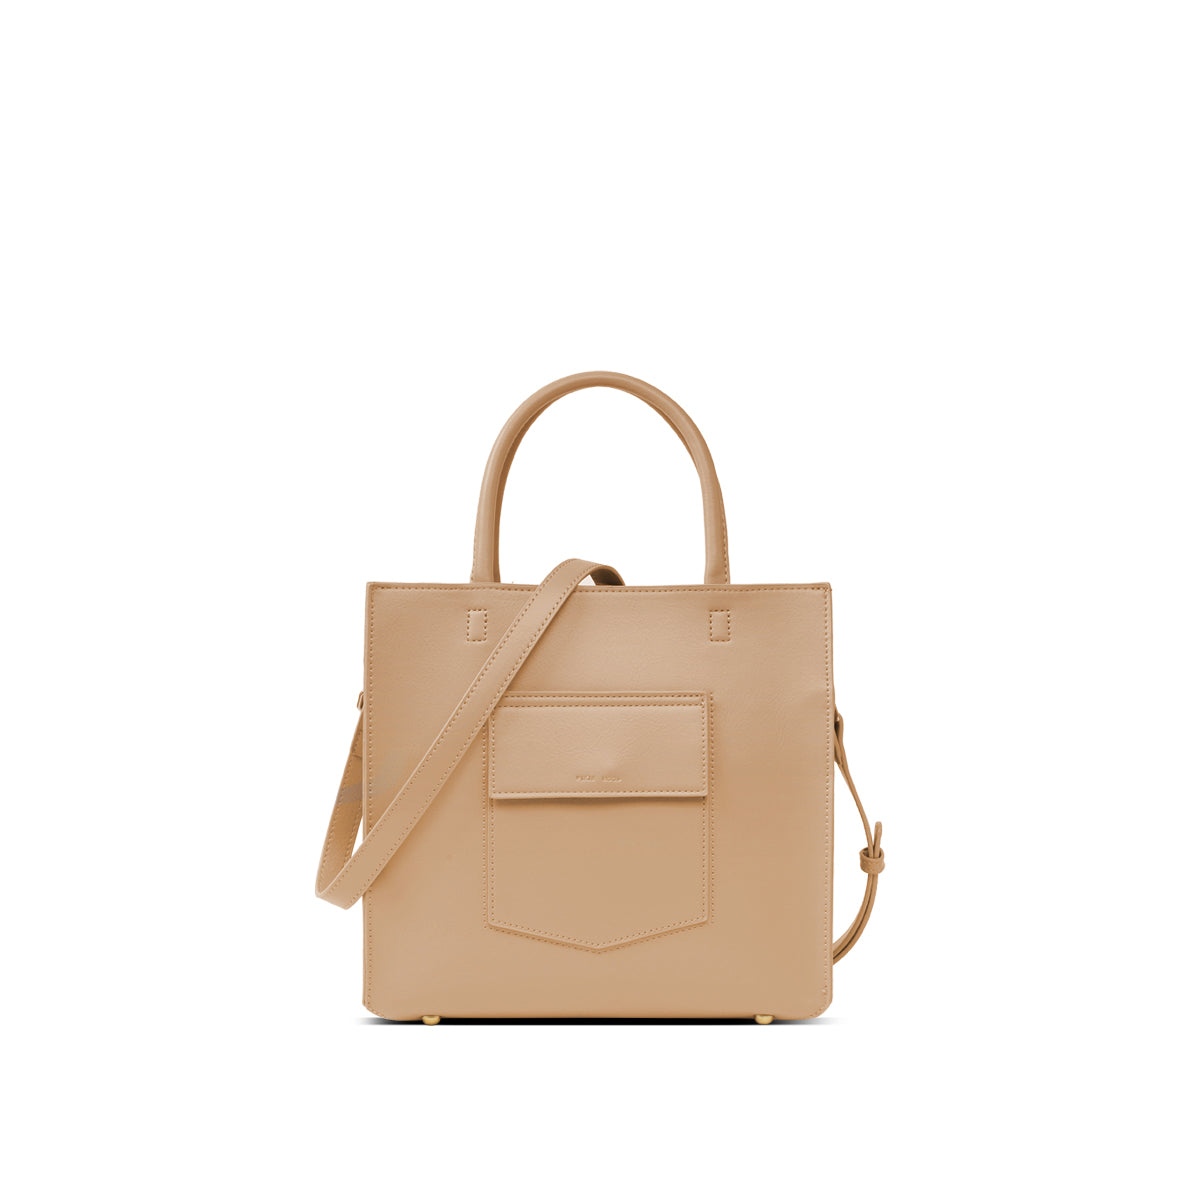 Caitlin Tote Small